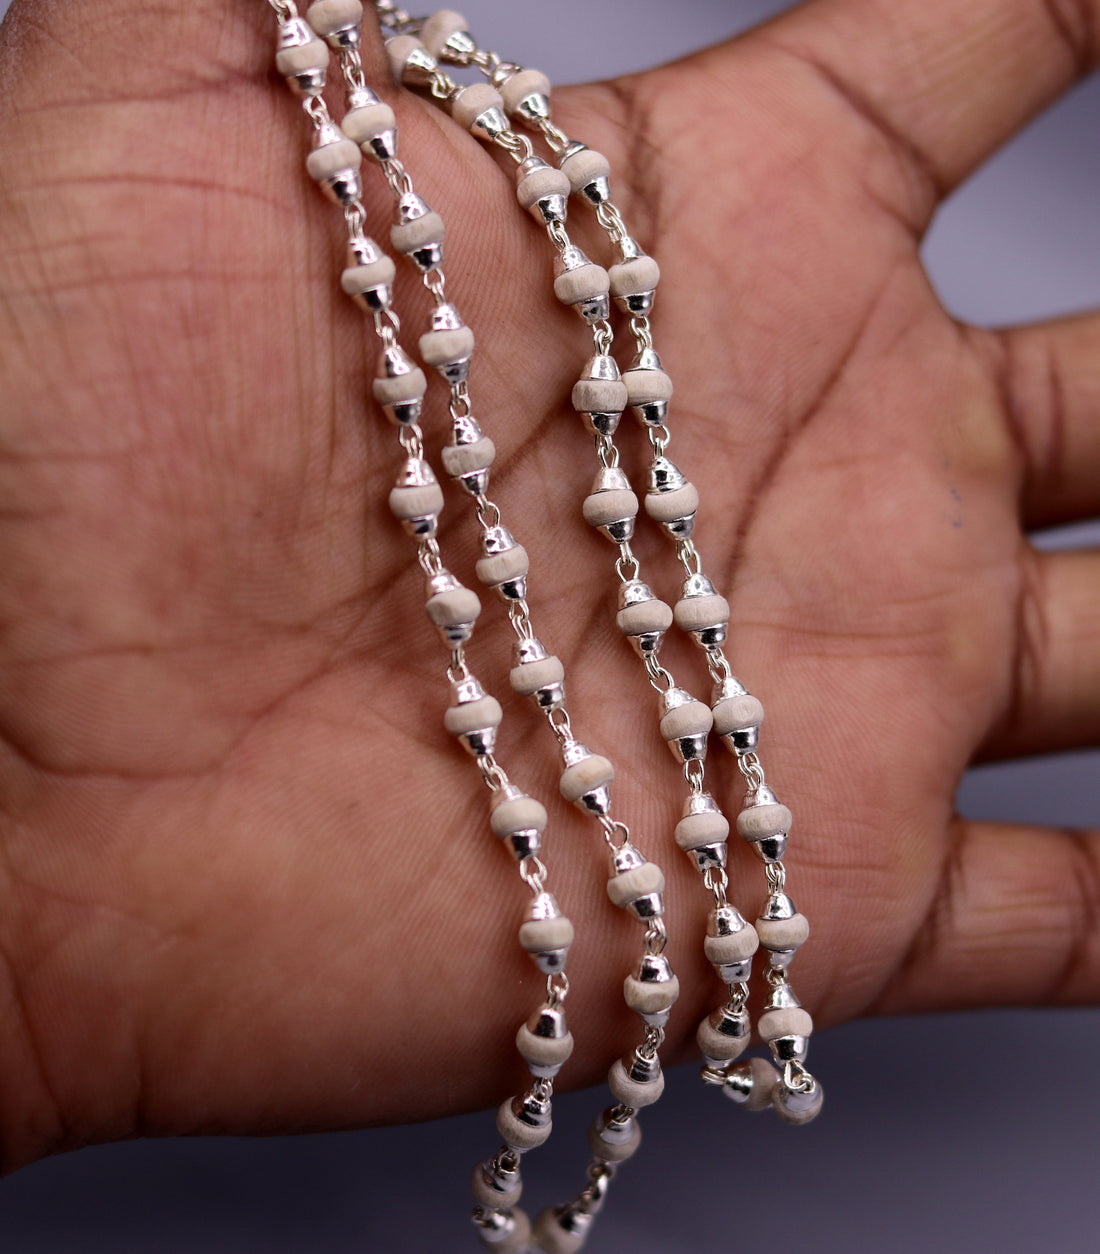 Silver handcrafted Basil rosary plant beads necklace chain tulsi mala use for Ayurveda for feel protected and focused from India ch21 - TRIBAL ORNAMENTS